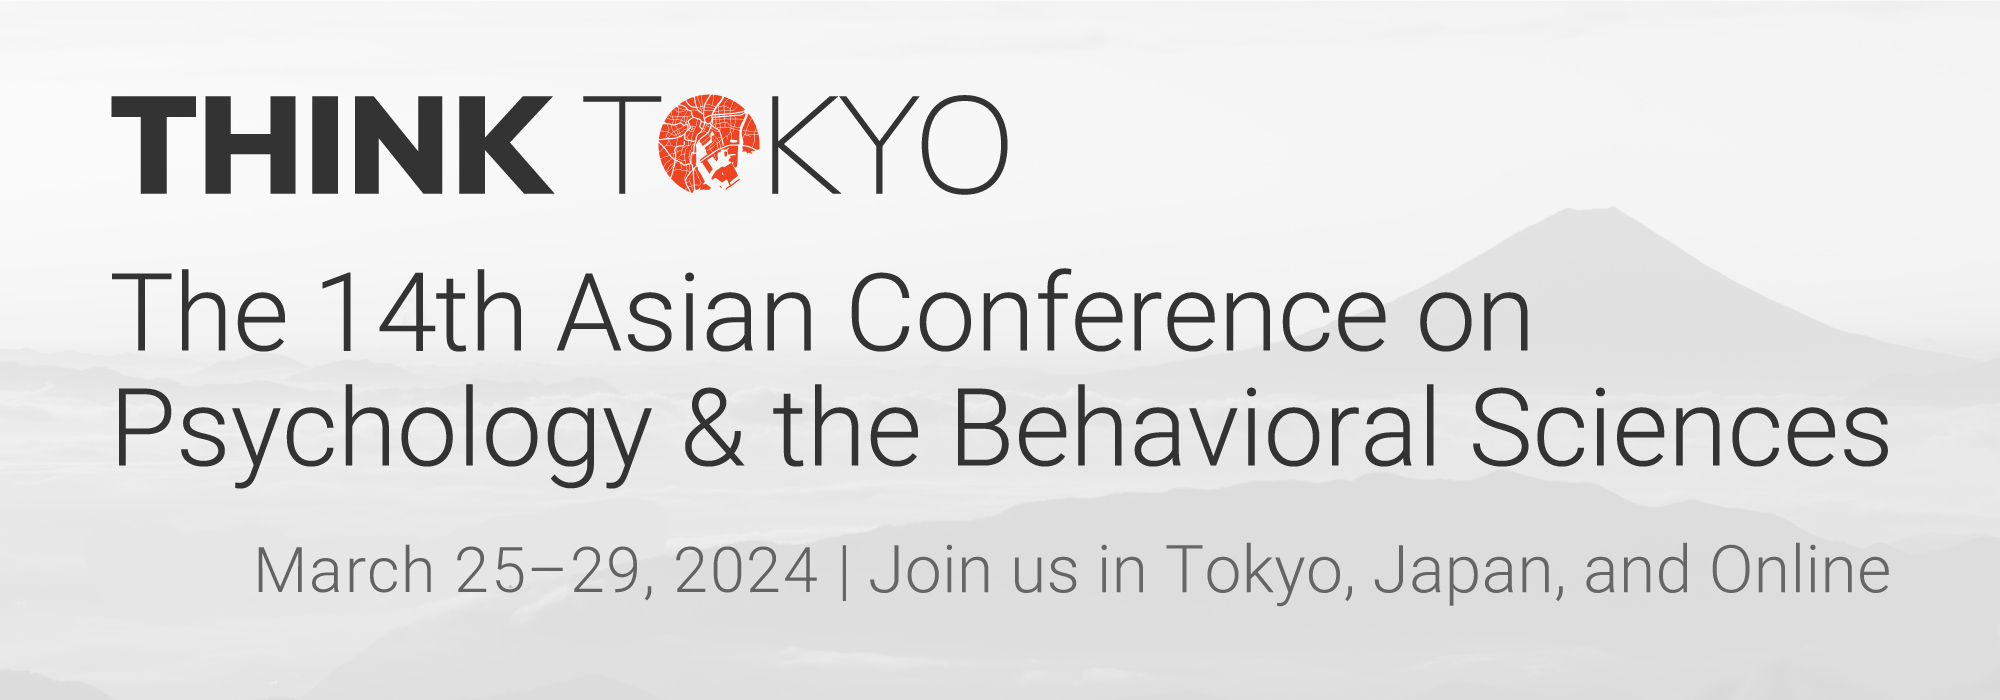 The 13th Asian Conference on Psychology & the Behavioral Sciences